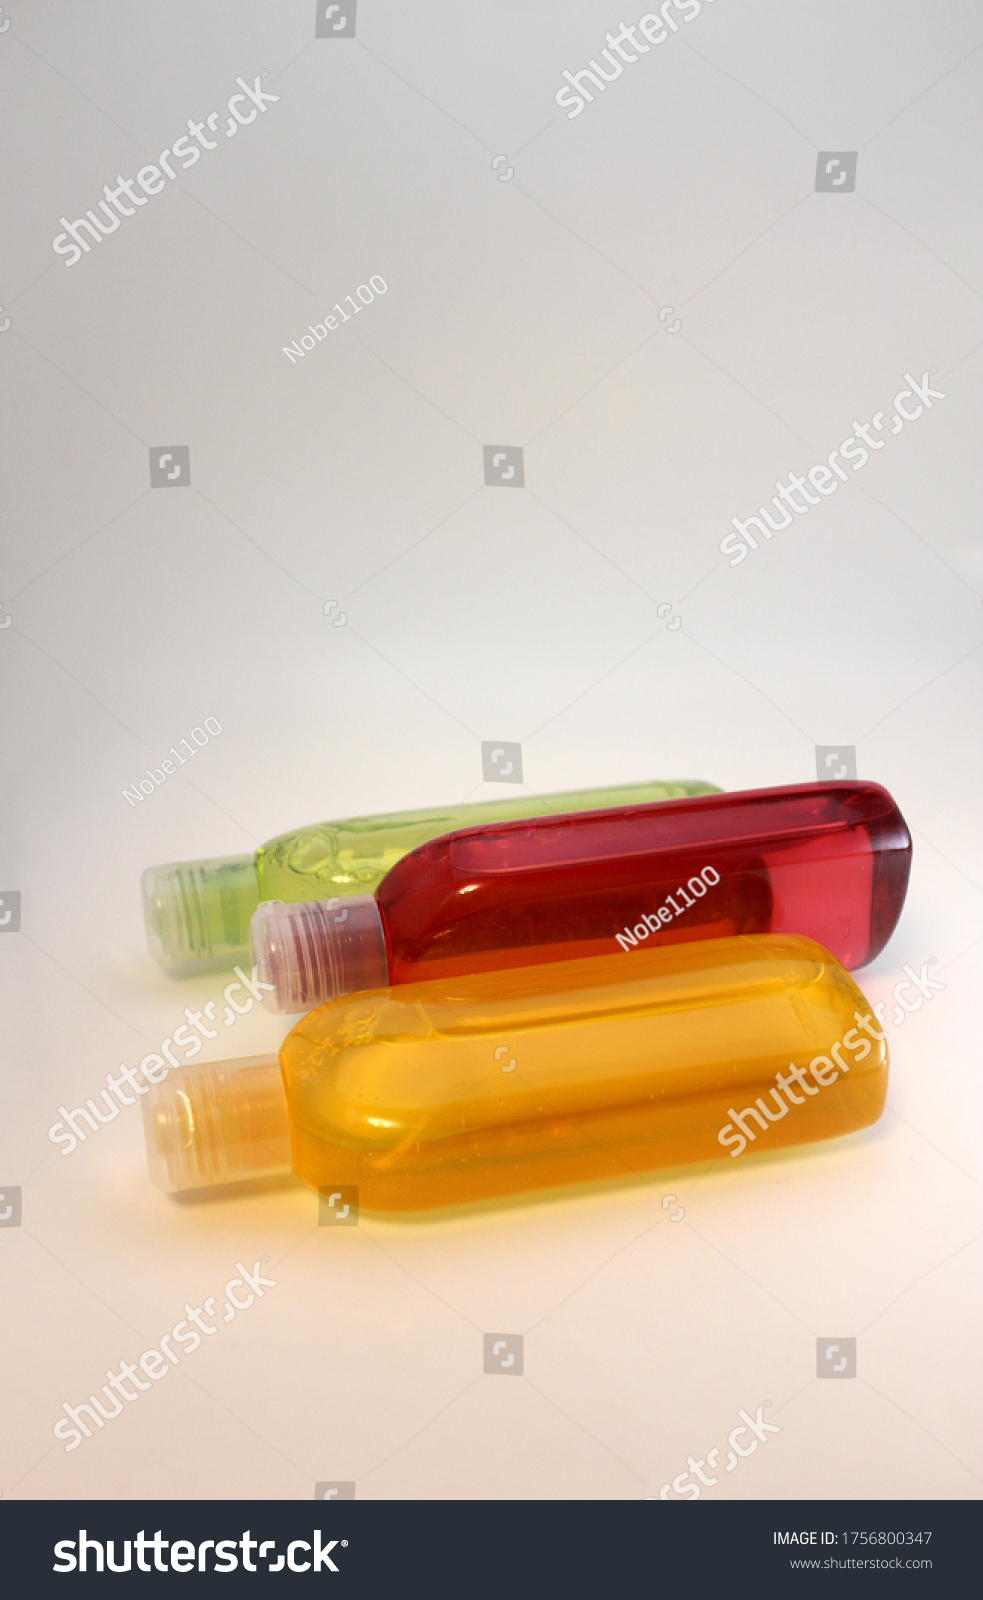 Download Shampoo Bottle Colorful Green Red Yellow Stock Photo Edit Now 1756800347 Yellowimages Mockups